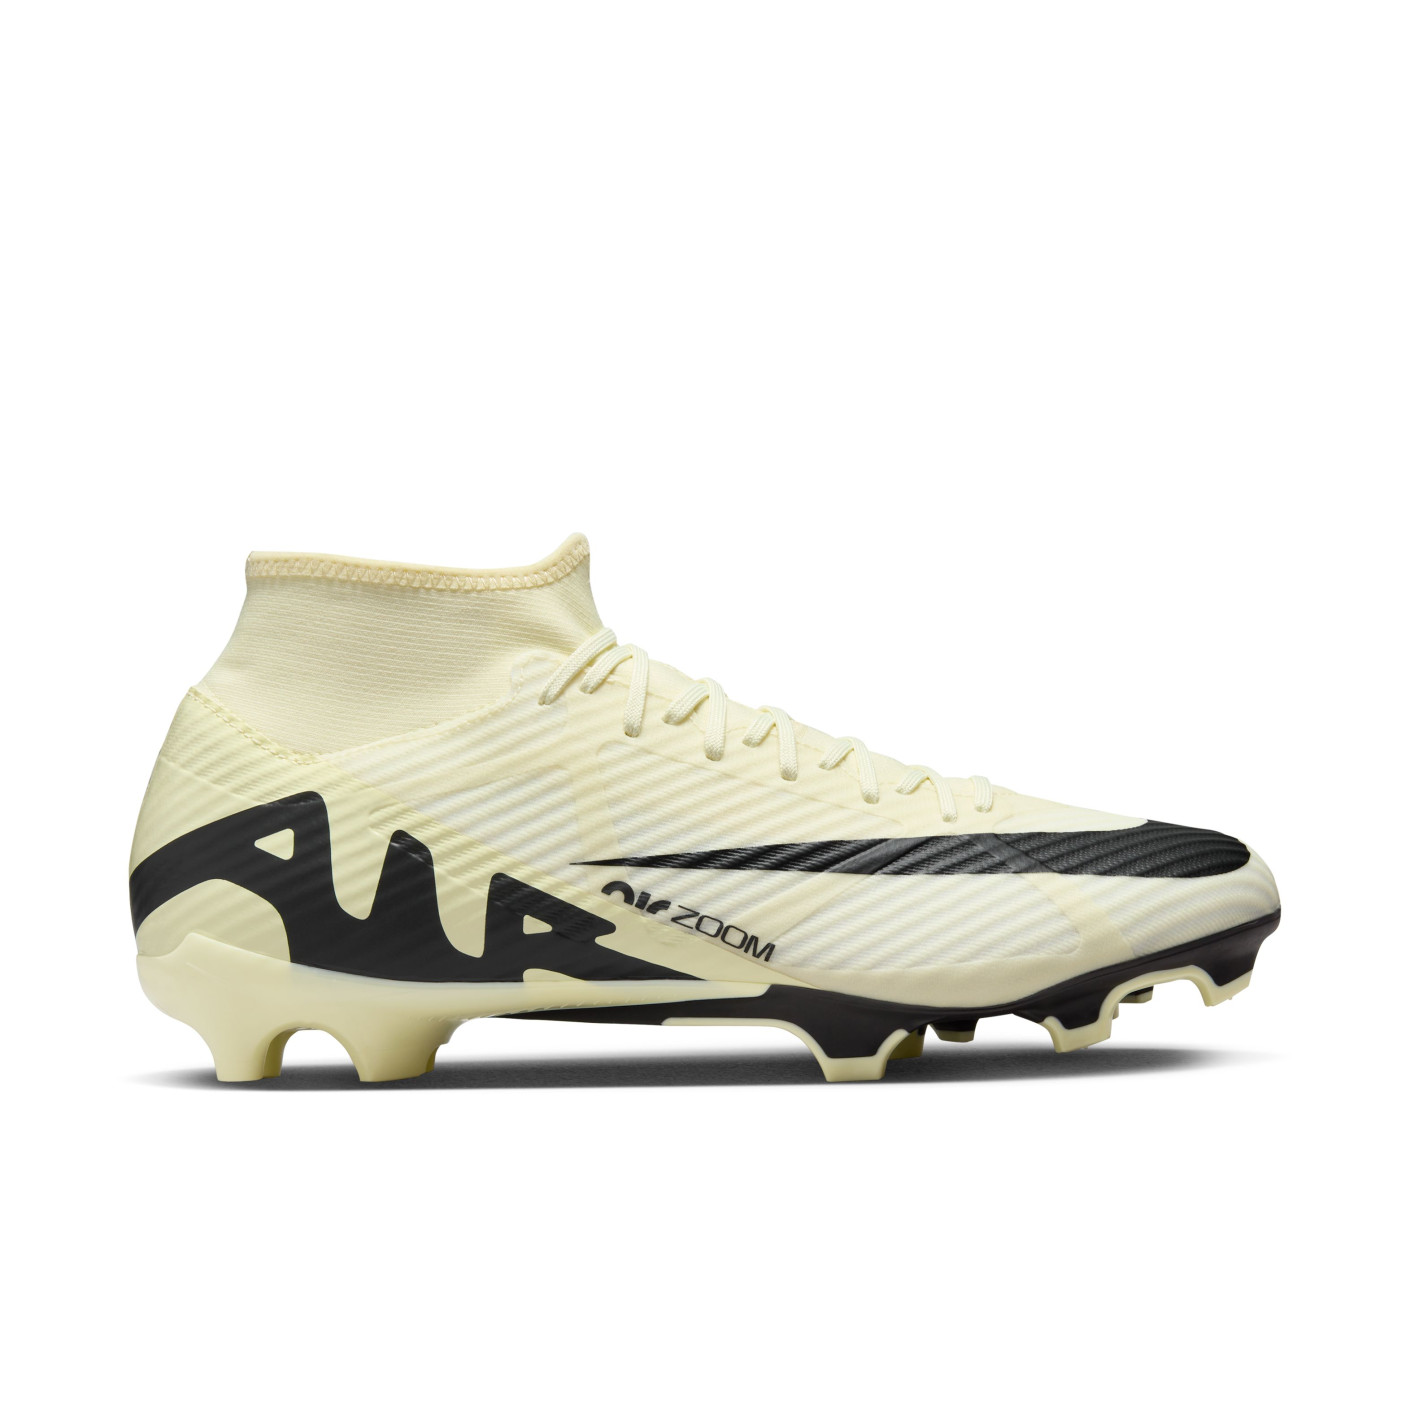 Nike Zoom Mercurial Superfly 9 Academy Grass/Artificial Grass Football Shoes (MG) Yellow Black